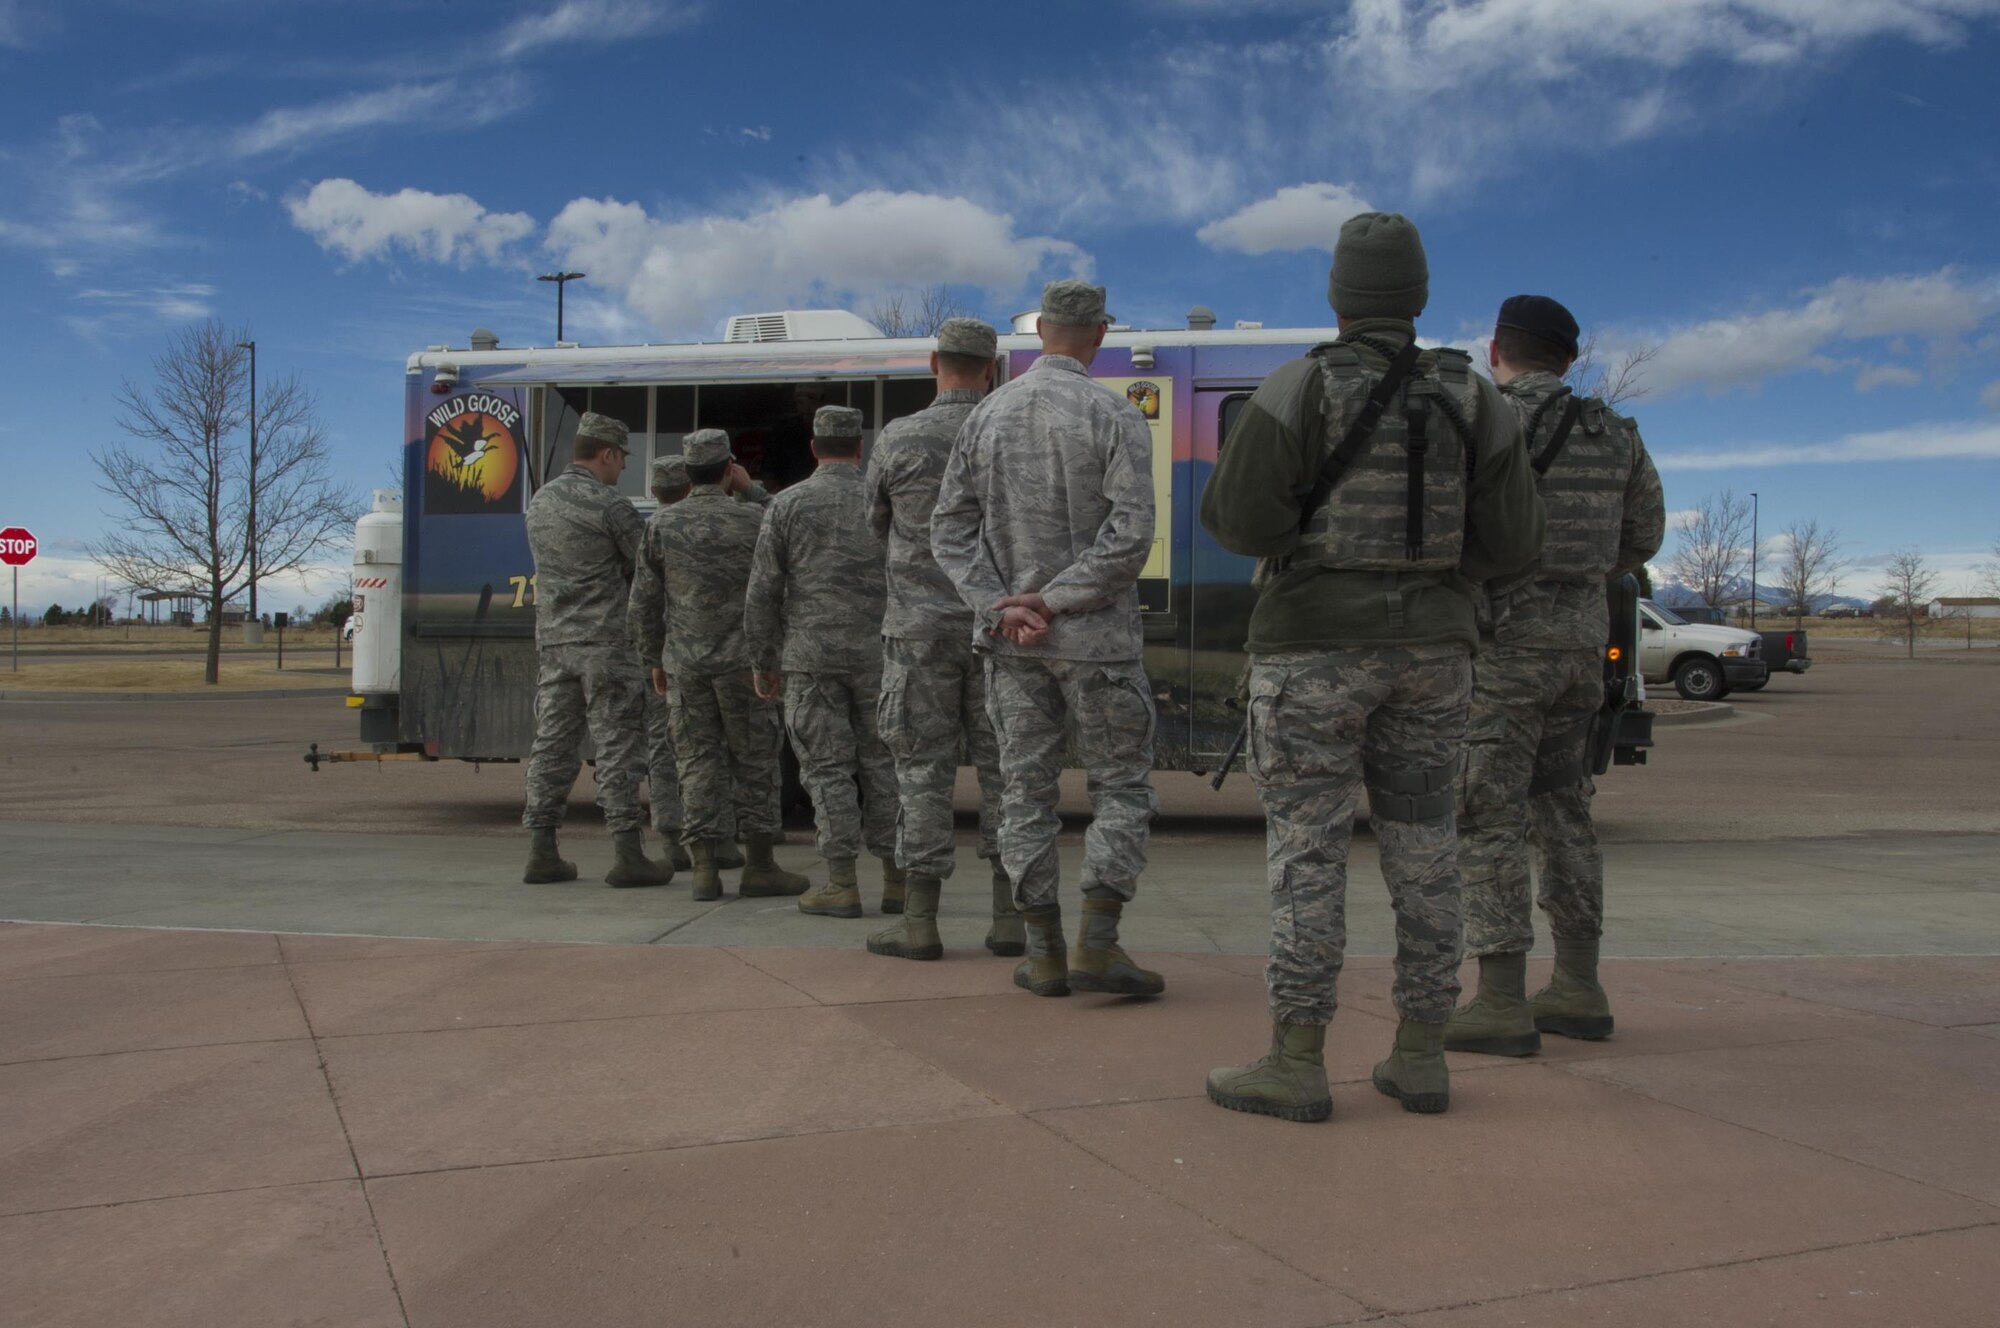 SCHRIEVER AIR FORCE BASE, Colo. -- Members of the 310th Space Wing stand in line waiting to order their lunch during the Unit Training Assembly on Saturday, Feb. 11th, 2017. With limited food options on Schriever during UTA weekends, the willingness of vendors to provide meal options for Reservists strengthened morale among members of the 310th. (U.S. Air Force photo/Staff Sgt. Chris Moore)